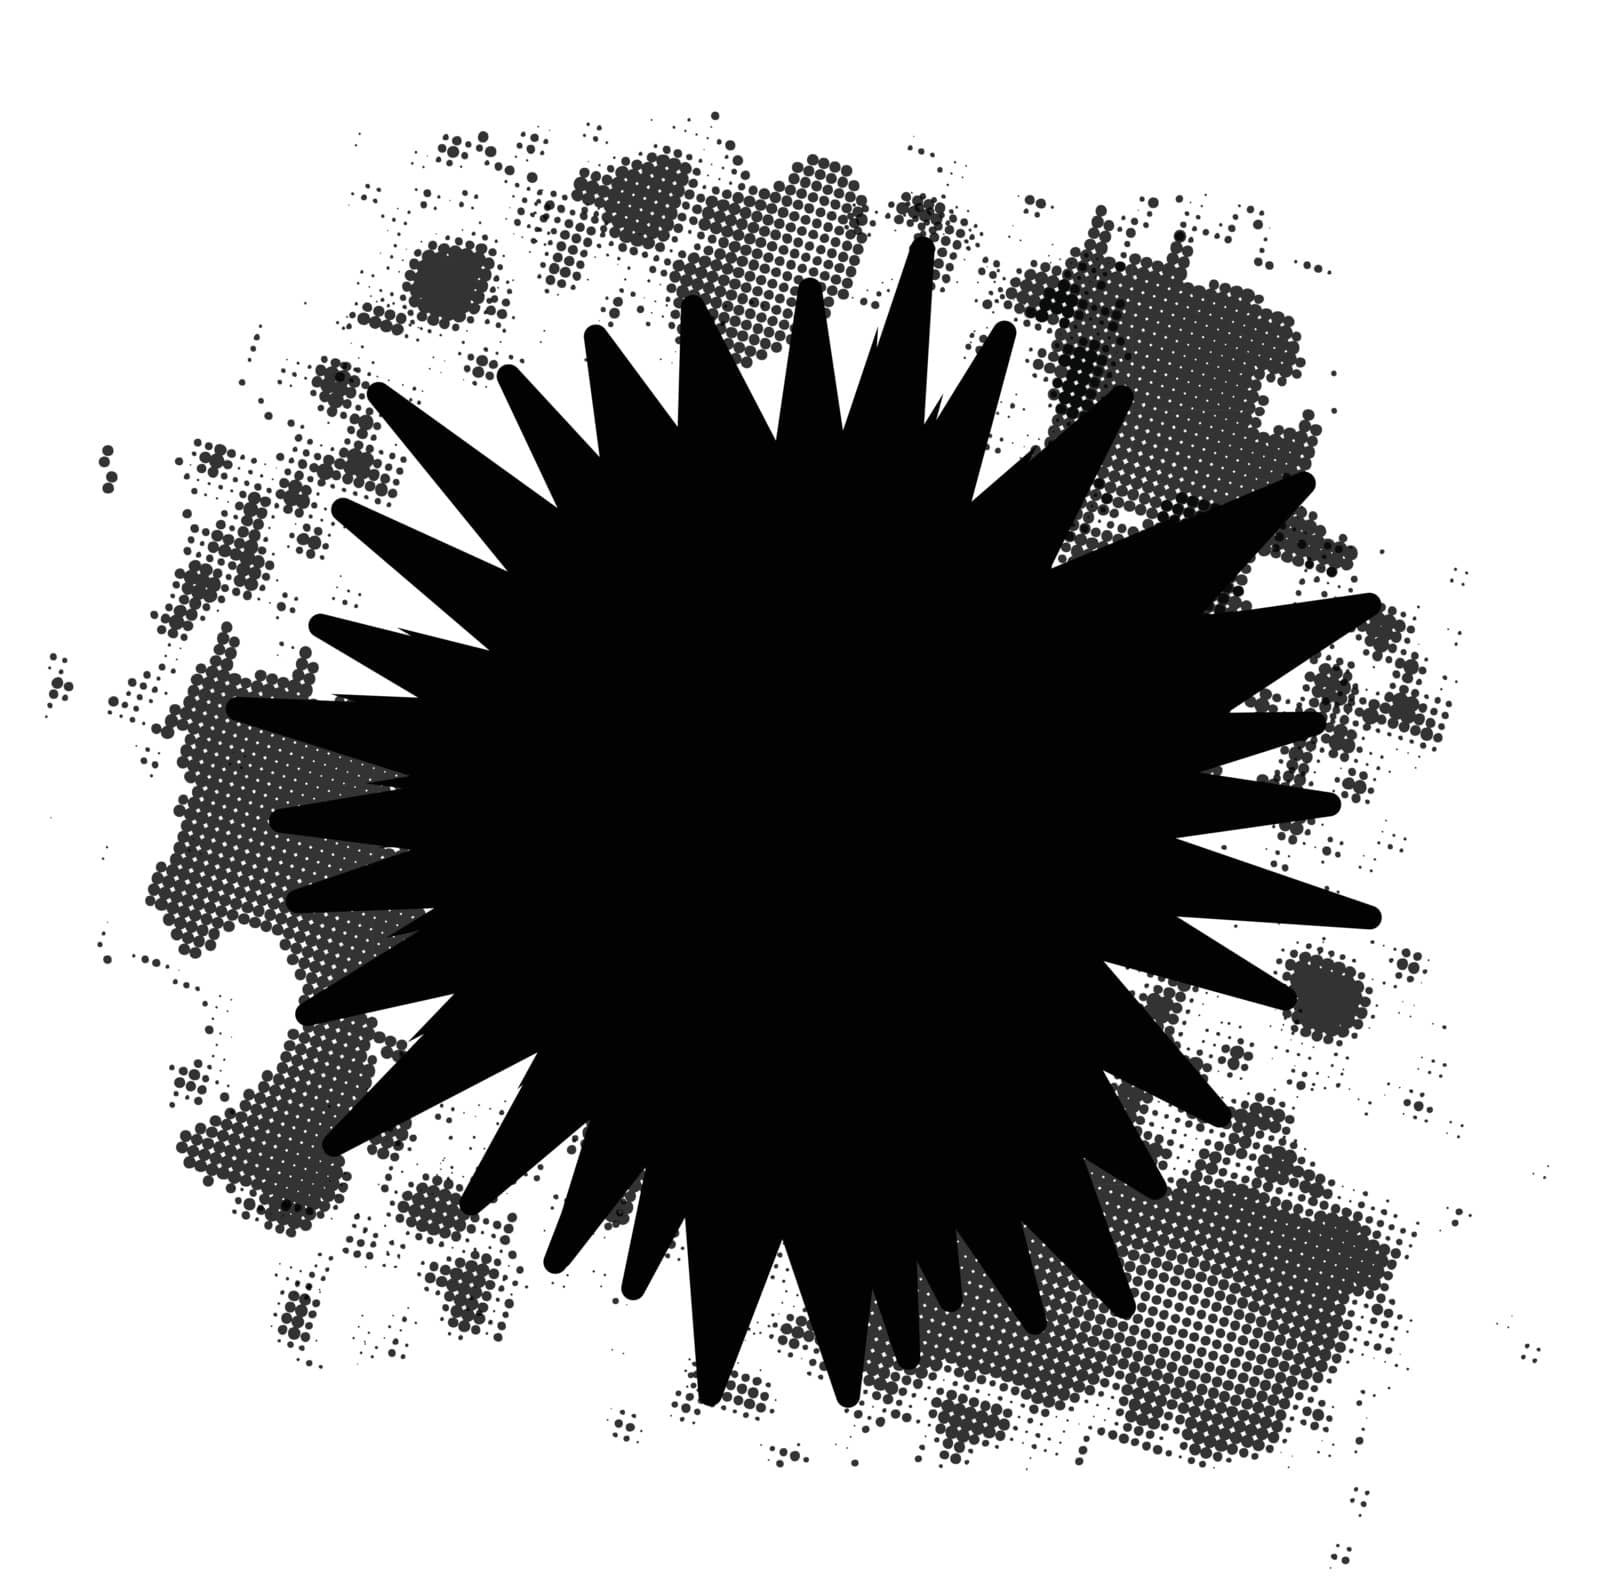 A comic cartoon style explosion in black isolated over a white background